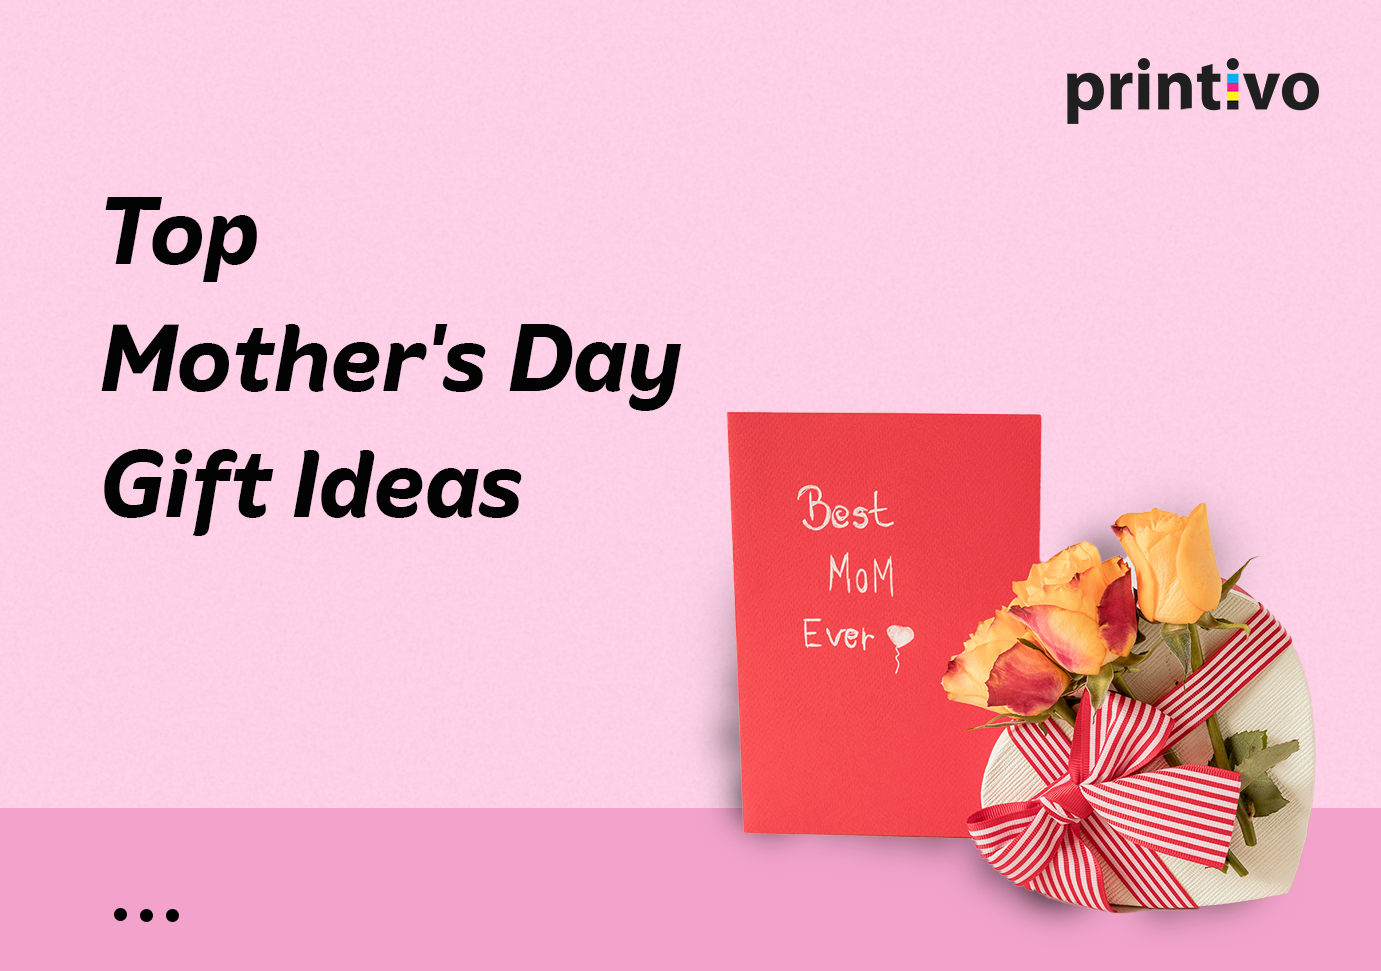 The Best Mother's Day Gift Ideas